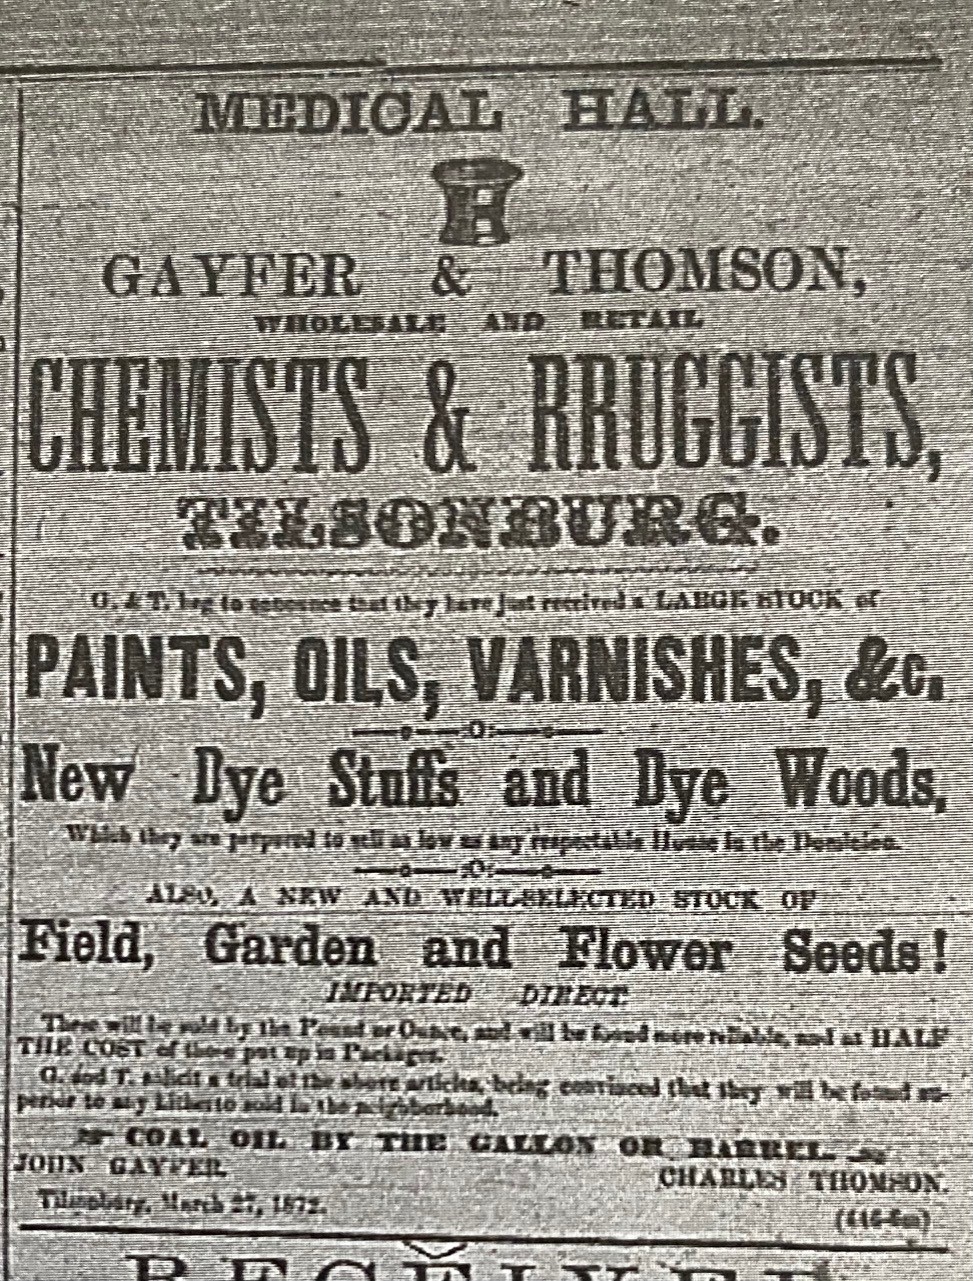 An advertisement for Gayfer & Thomson, chemists & druggists, advertising paints, oils, varnishes, new dye stuffs, dye woods, gardens seeds, coal oil and more.